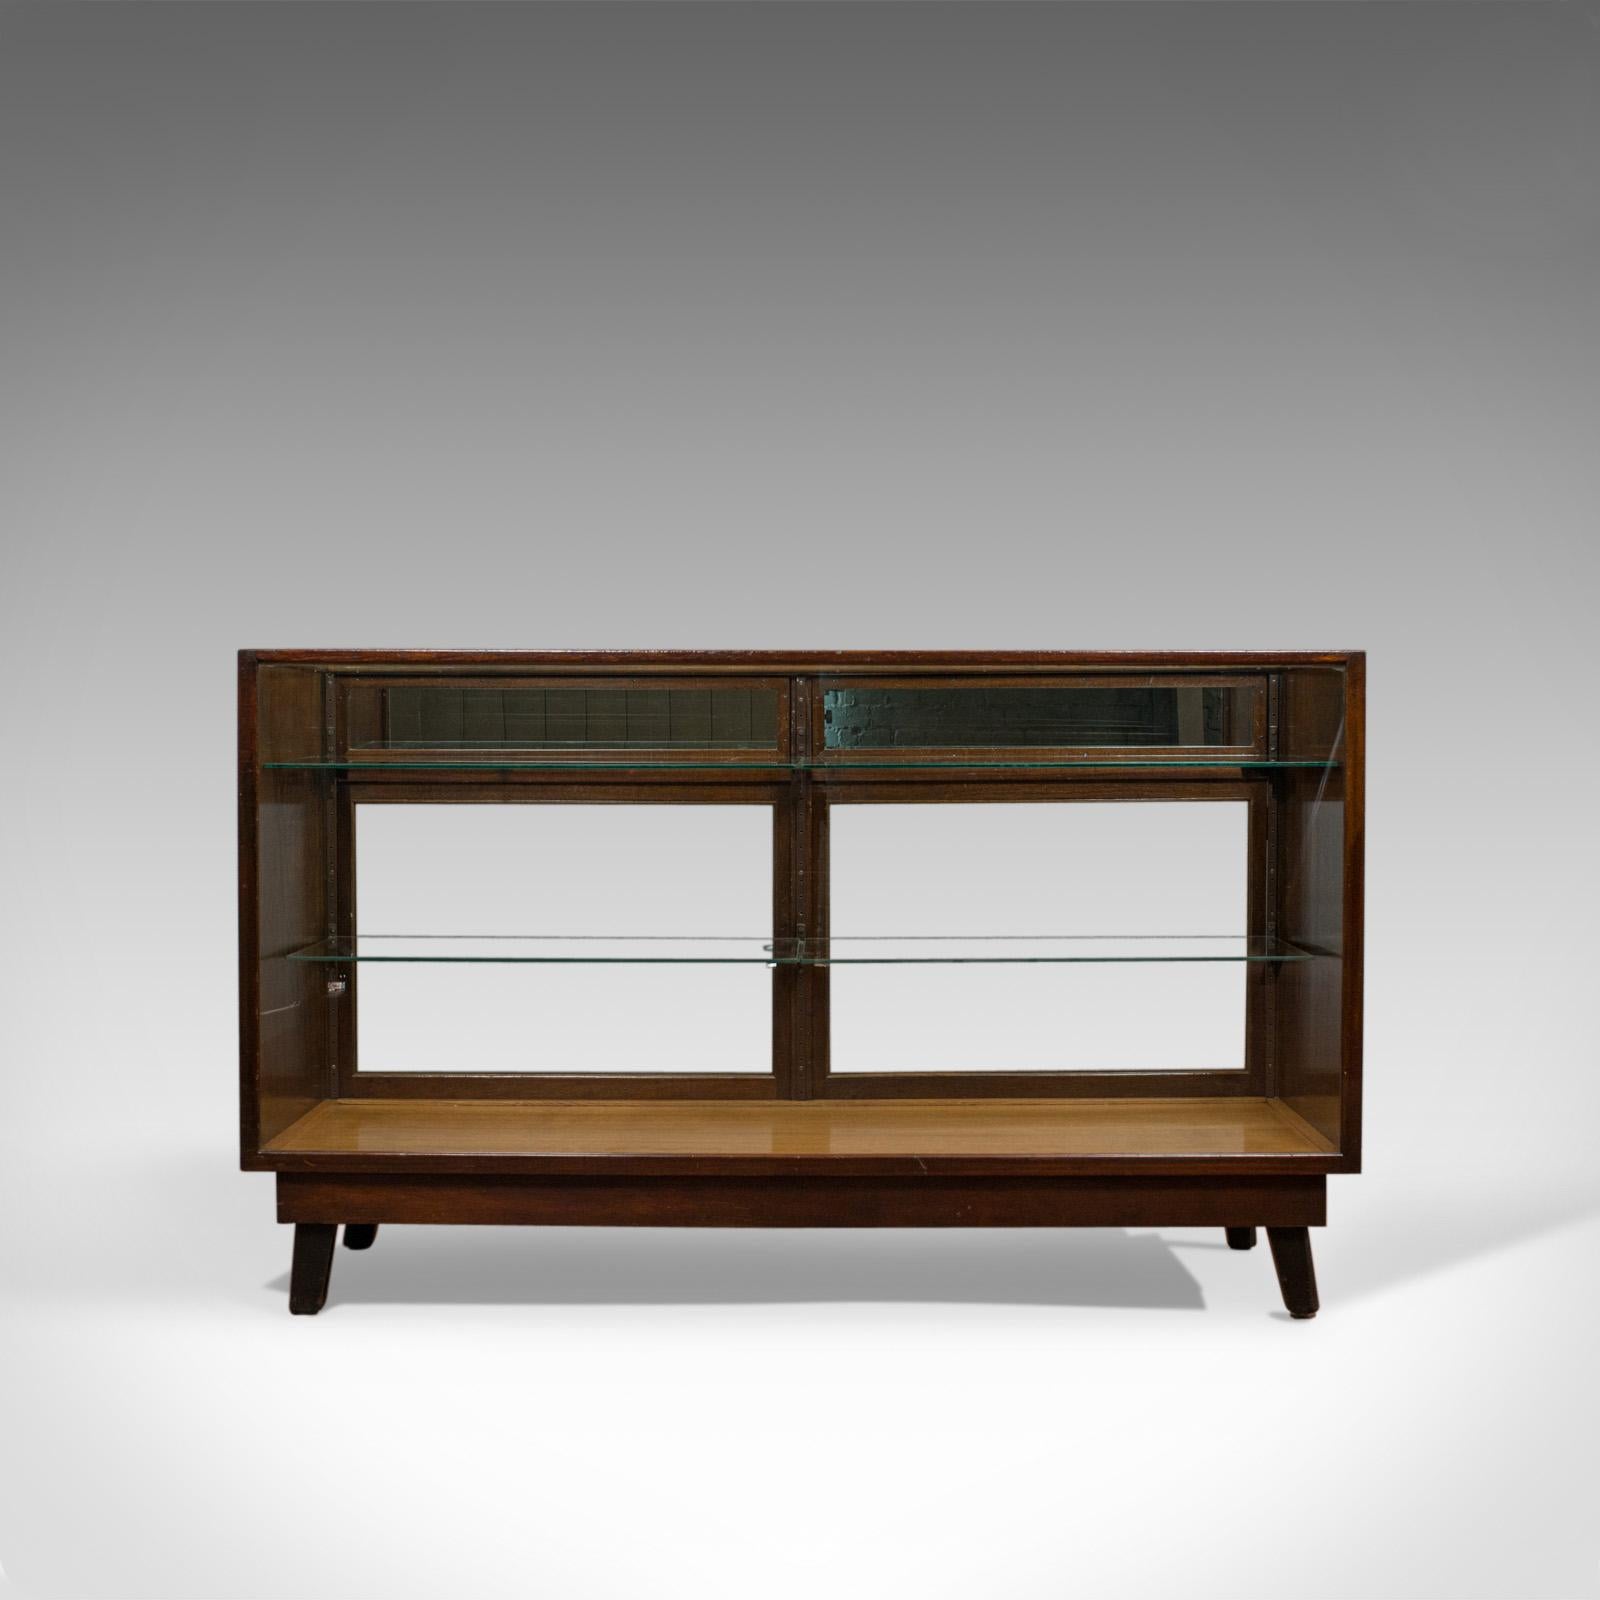 This is an antique commercial display cabinet. An English, mahogany and oak showcase dating to the Edwardian period, circa 1910.

Displays a desirable aged patina
Select cuts of mahogany and oak with fine grain interest
Original plate glass in